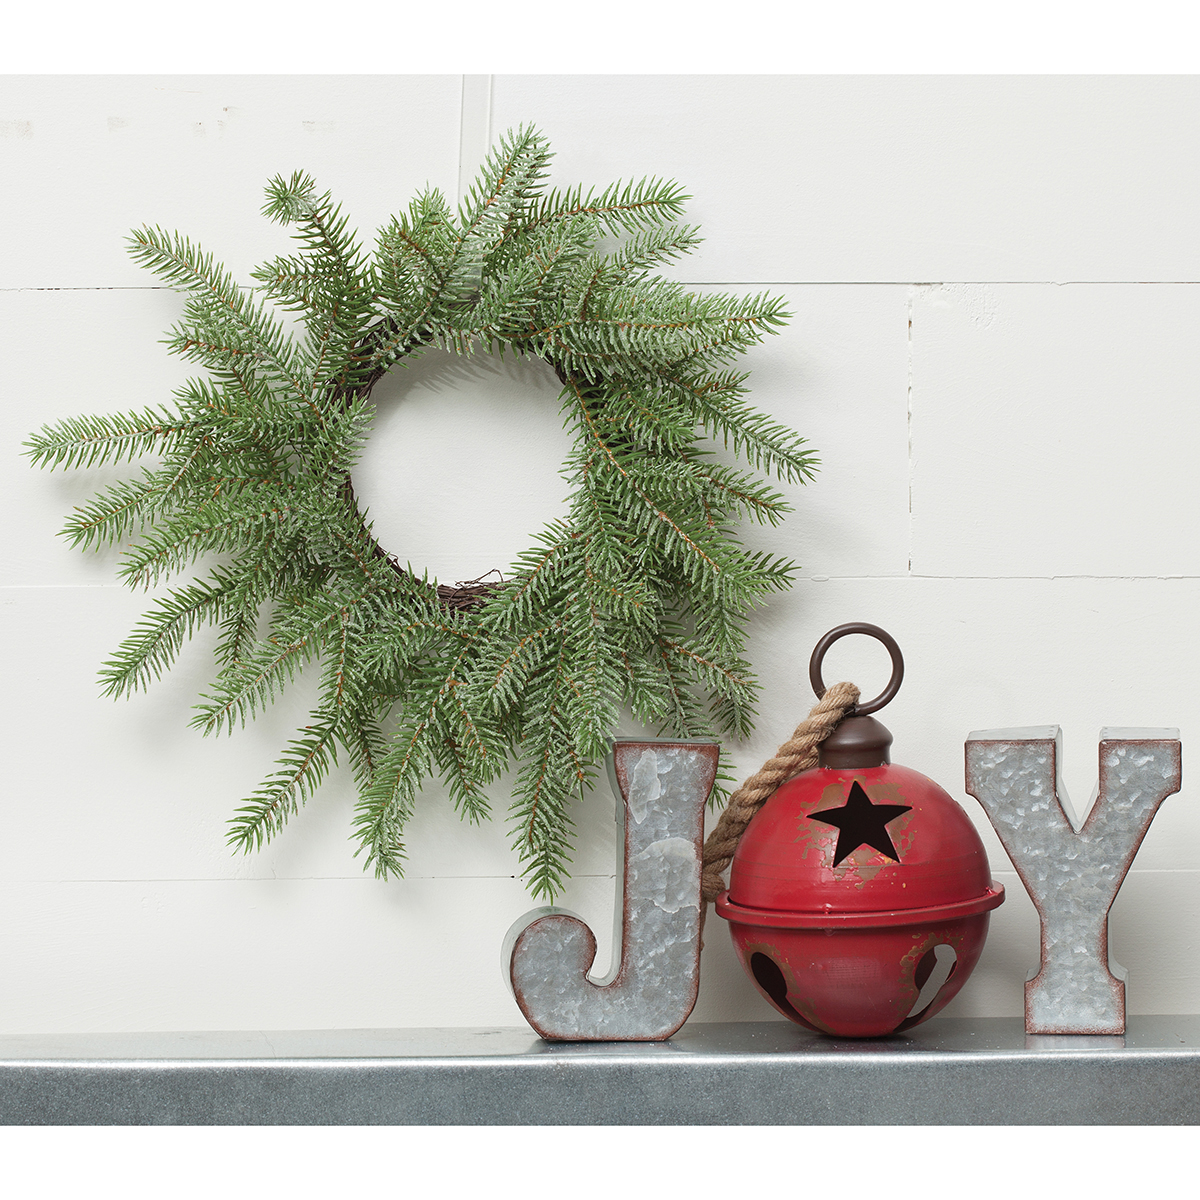 !NORDIC FIR PINE WREATH WITH MICA AND V22 f33